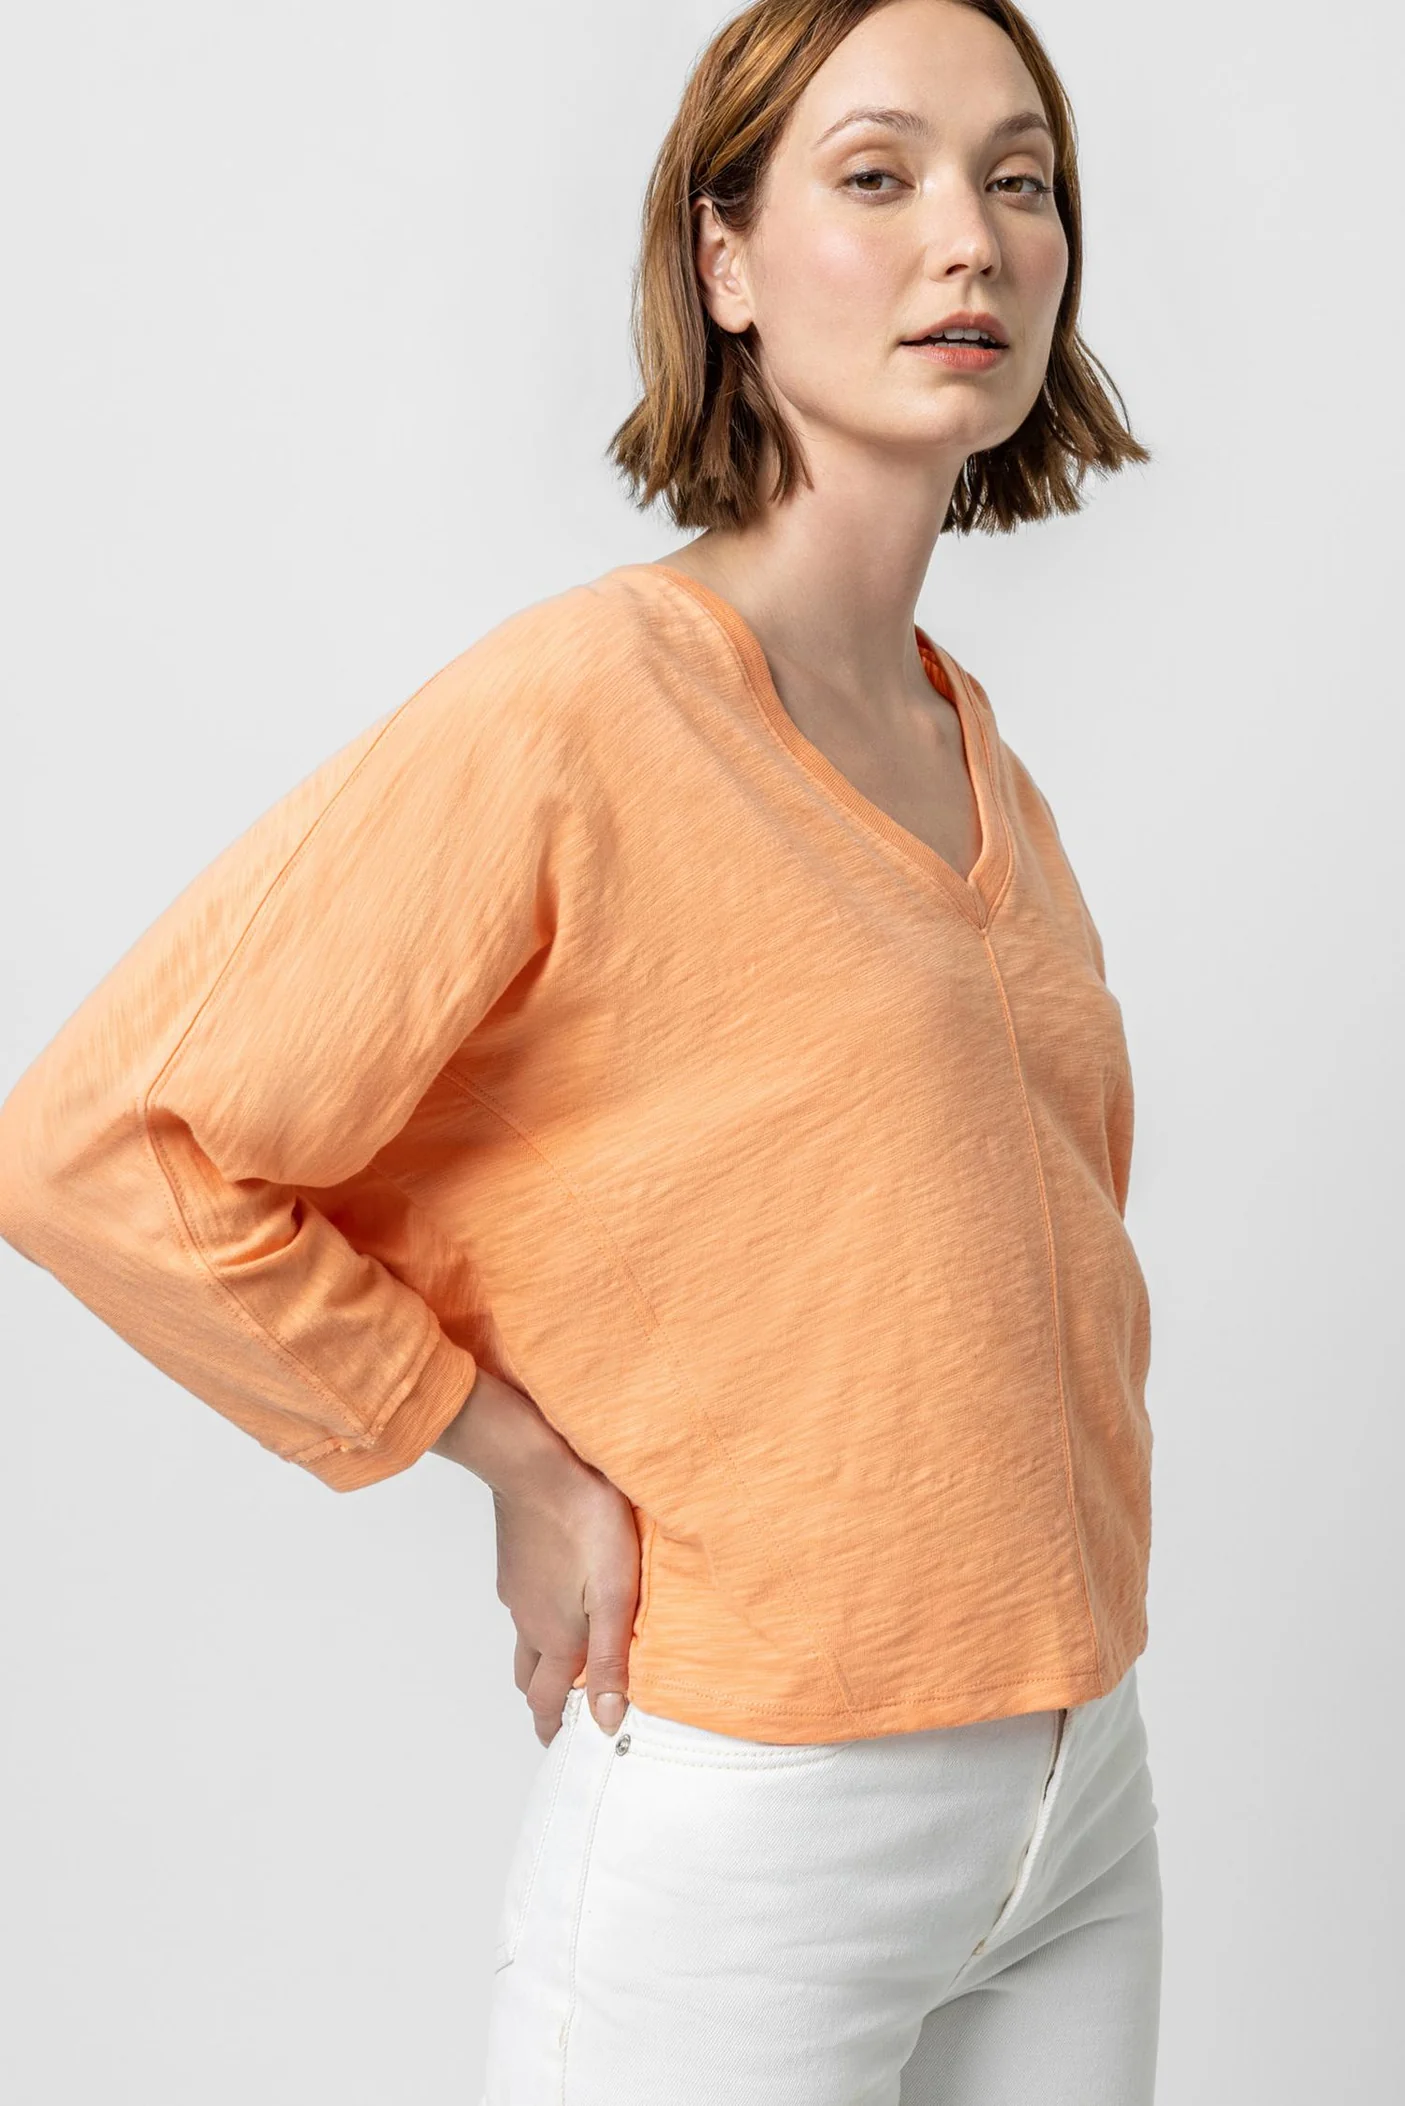 V-Neck Dolman with Seam Detail In Melon